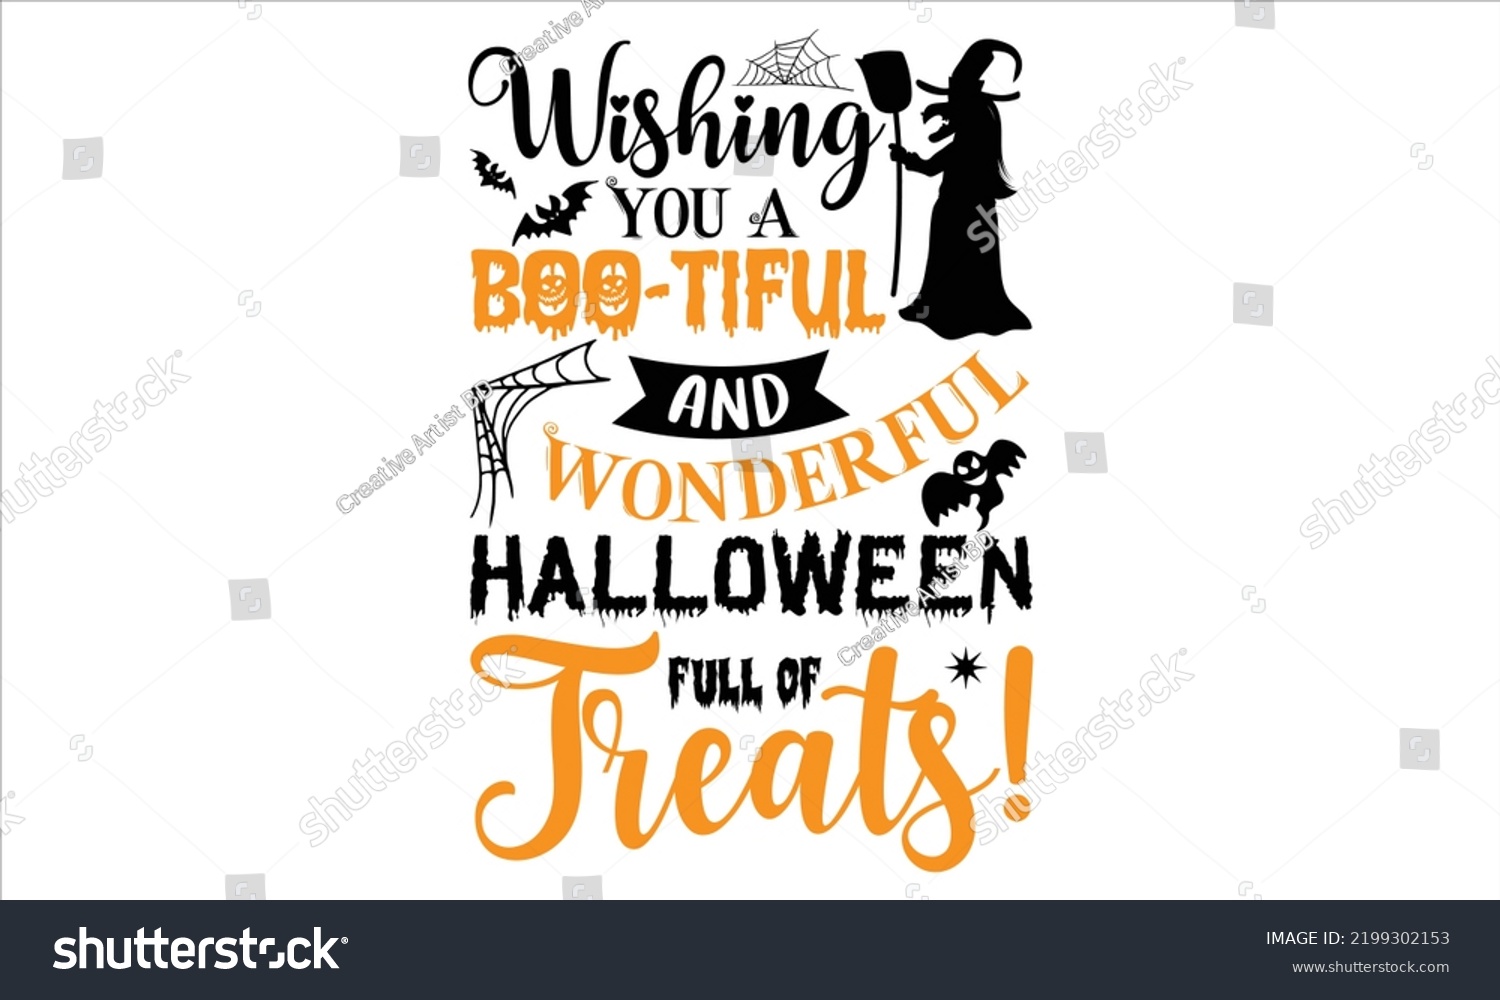 SVG of Wishing You A Boo-tiful And Wonderful Halloween Full Of Treats! - Halloween T shirt Design, Hand drawn lettering and calligraphy, Svg Files for Cricut, Instant Download, Illustration for prints on bag svg